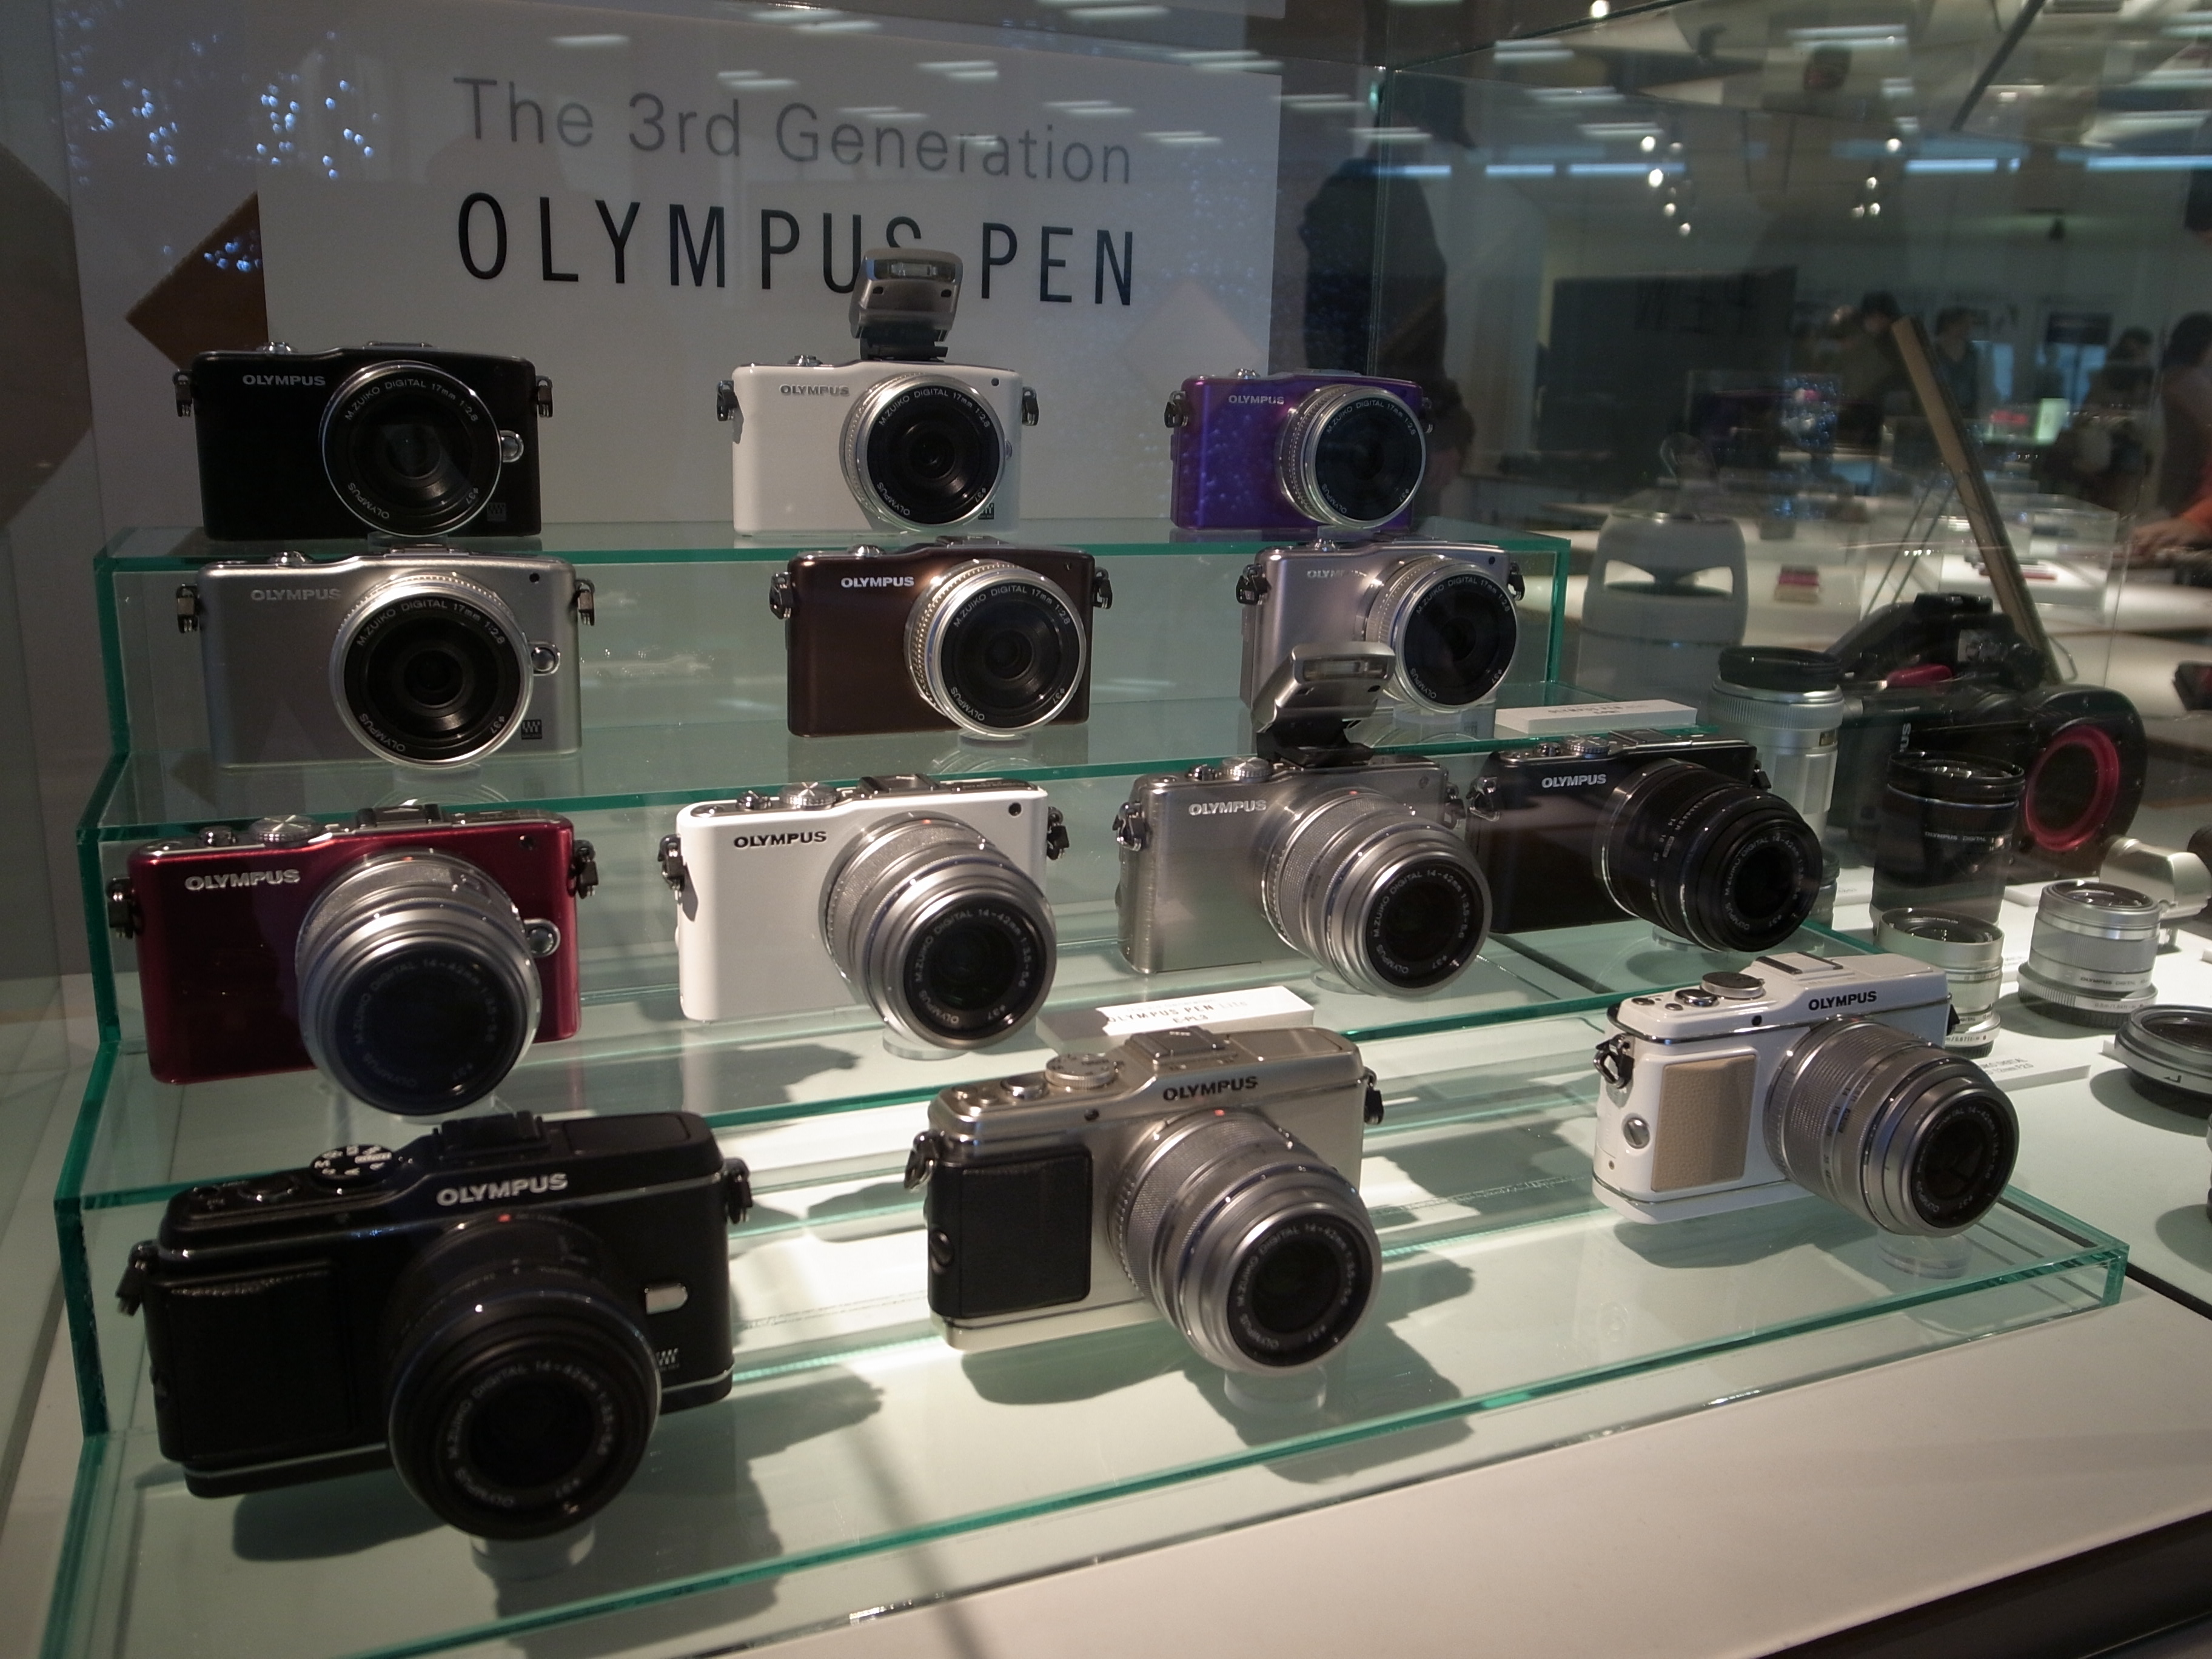 Olympus Pen, The 3rd Generation - Good Design Award 2011 exhibition (2011-11-03 14.23.58 by na0905)